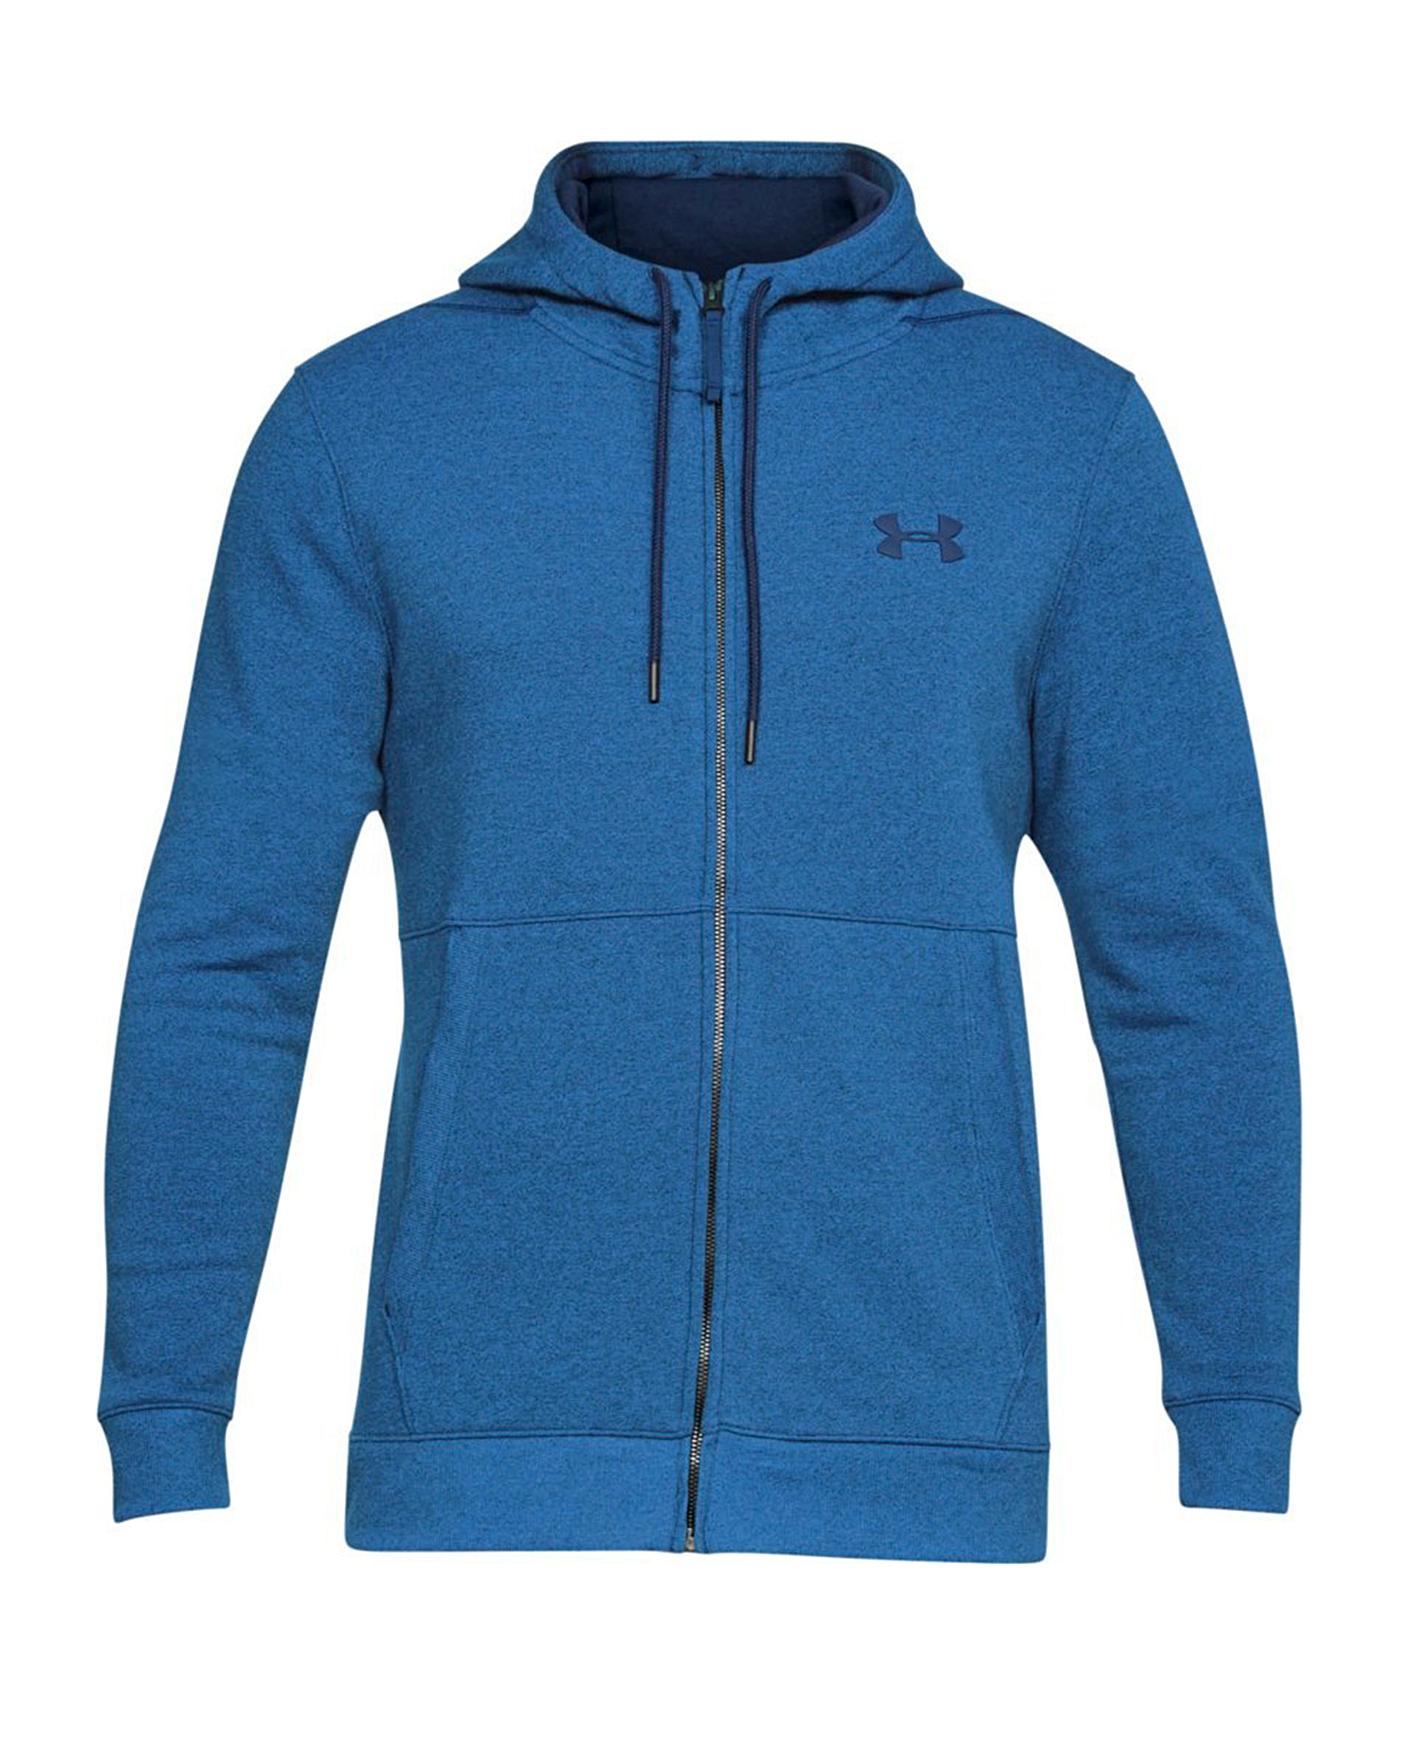 where can i buy under armour hoodies